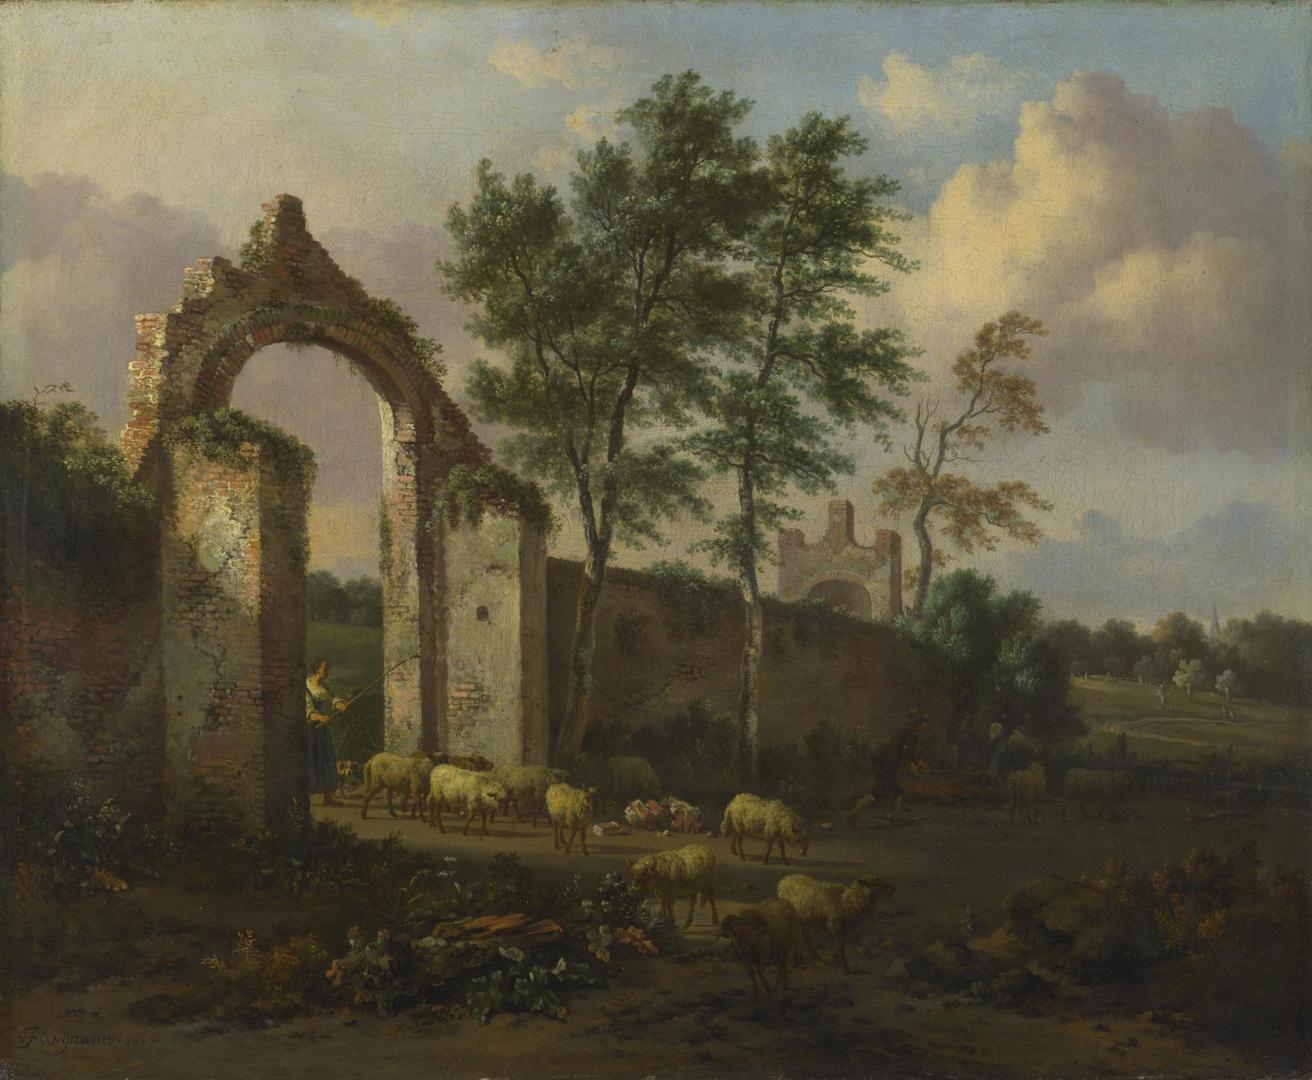 A Landscape with a Ruined Archway by Jan Wijnants